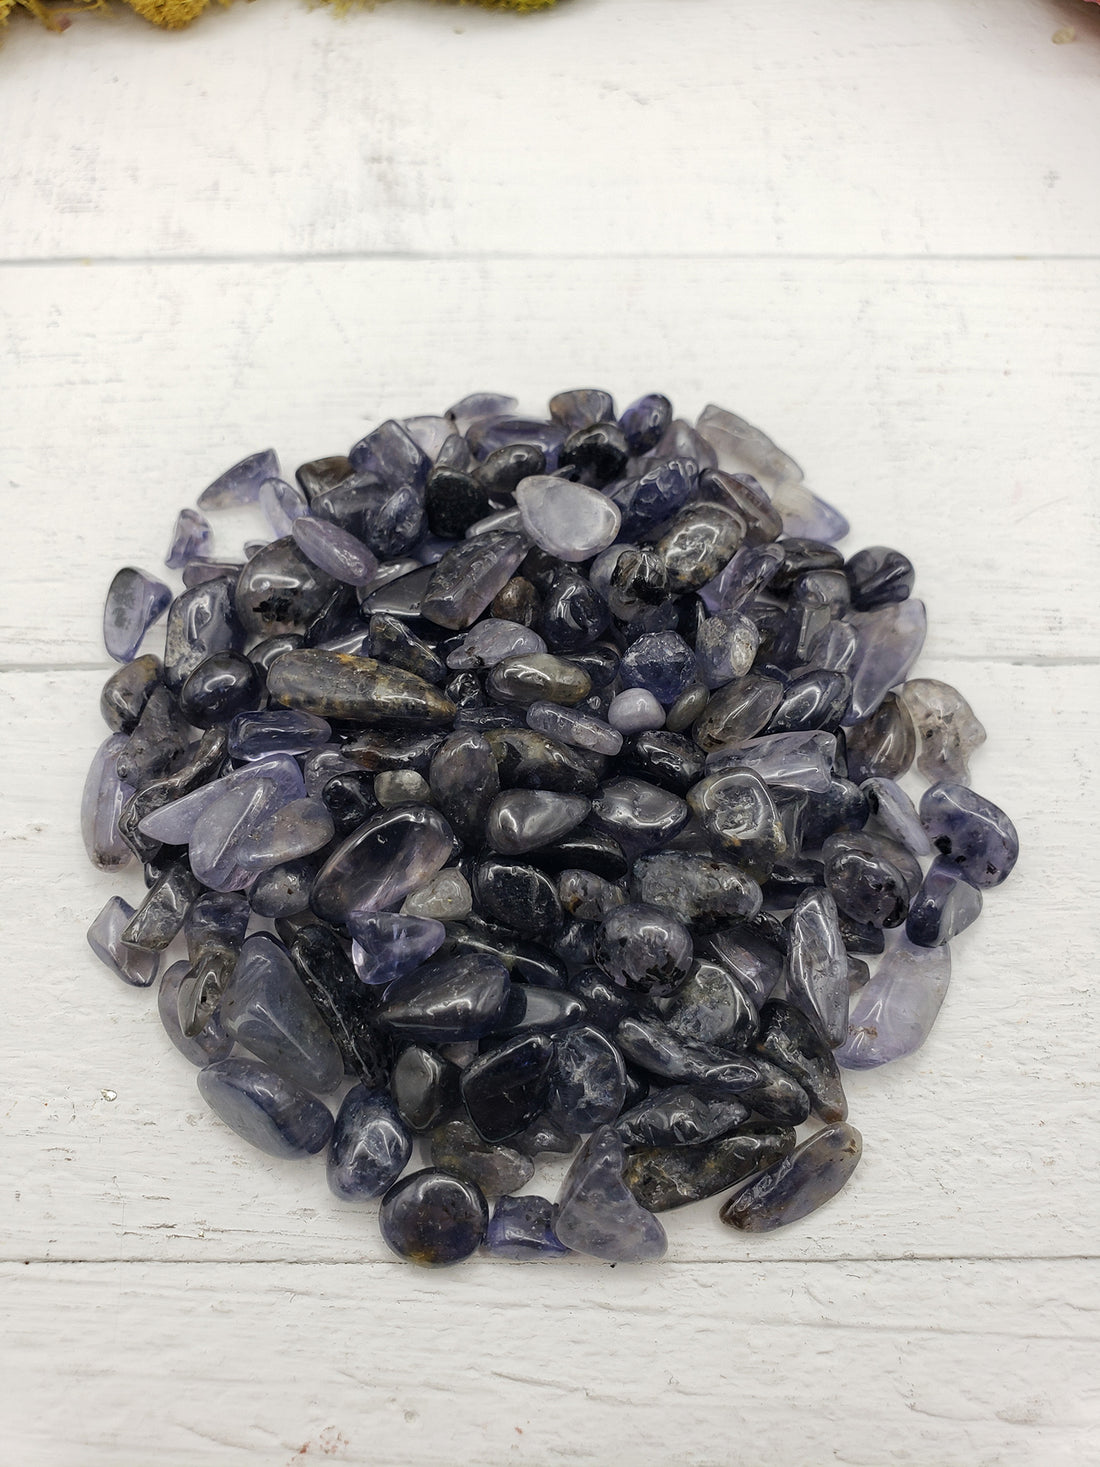 Two ounces of iolite crystal chips on display